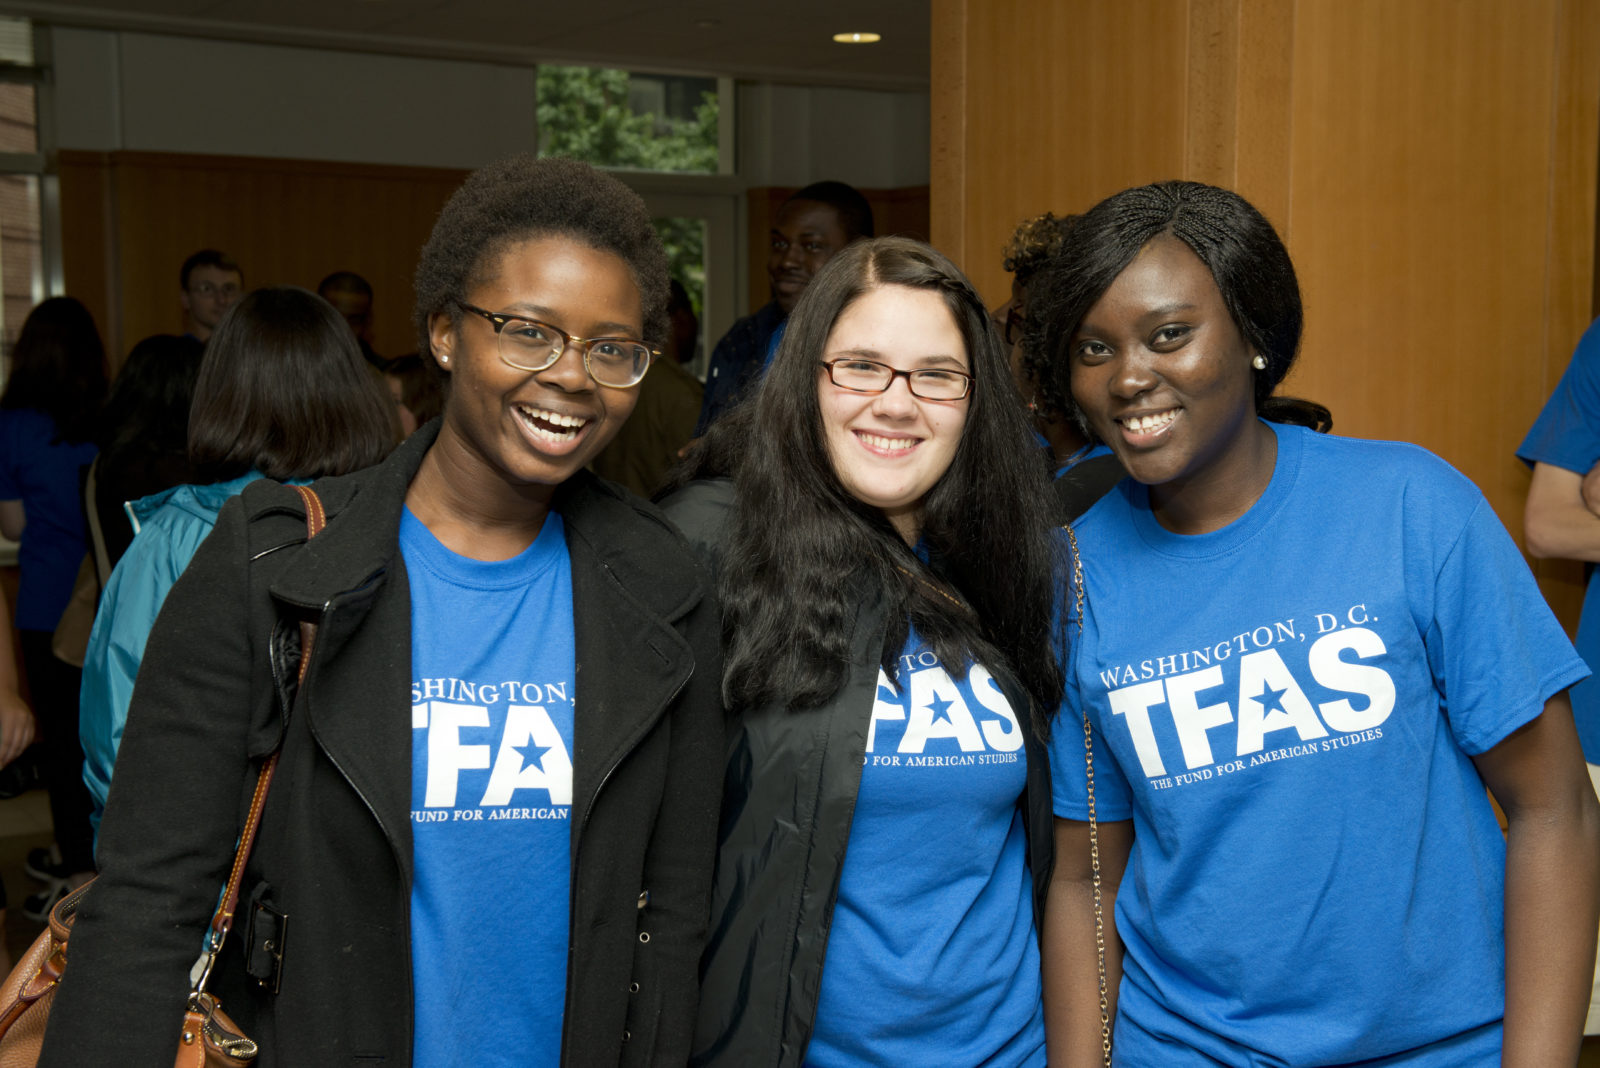 Mercy Anguah (IEIA 13) (right) smiles with her new friends before the monument tour on her first day at TFAS.